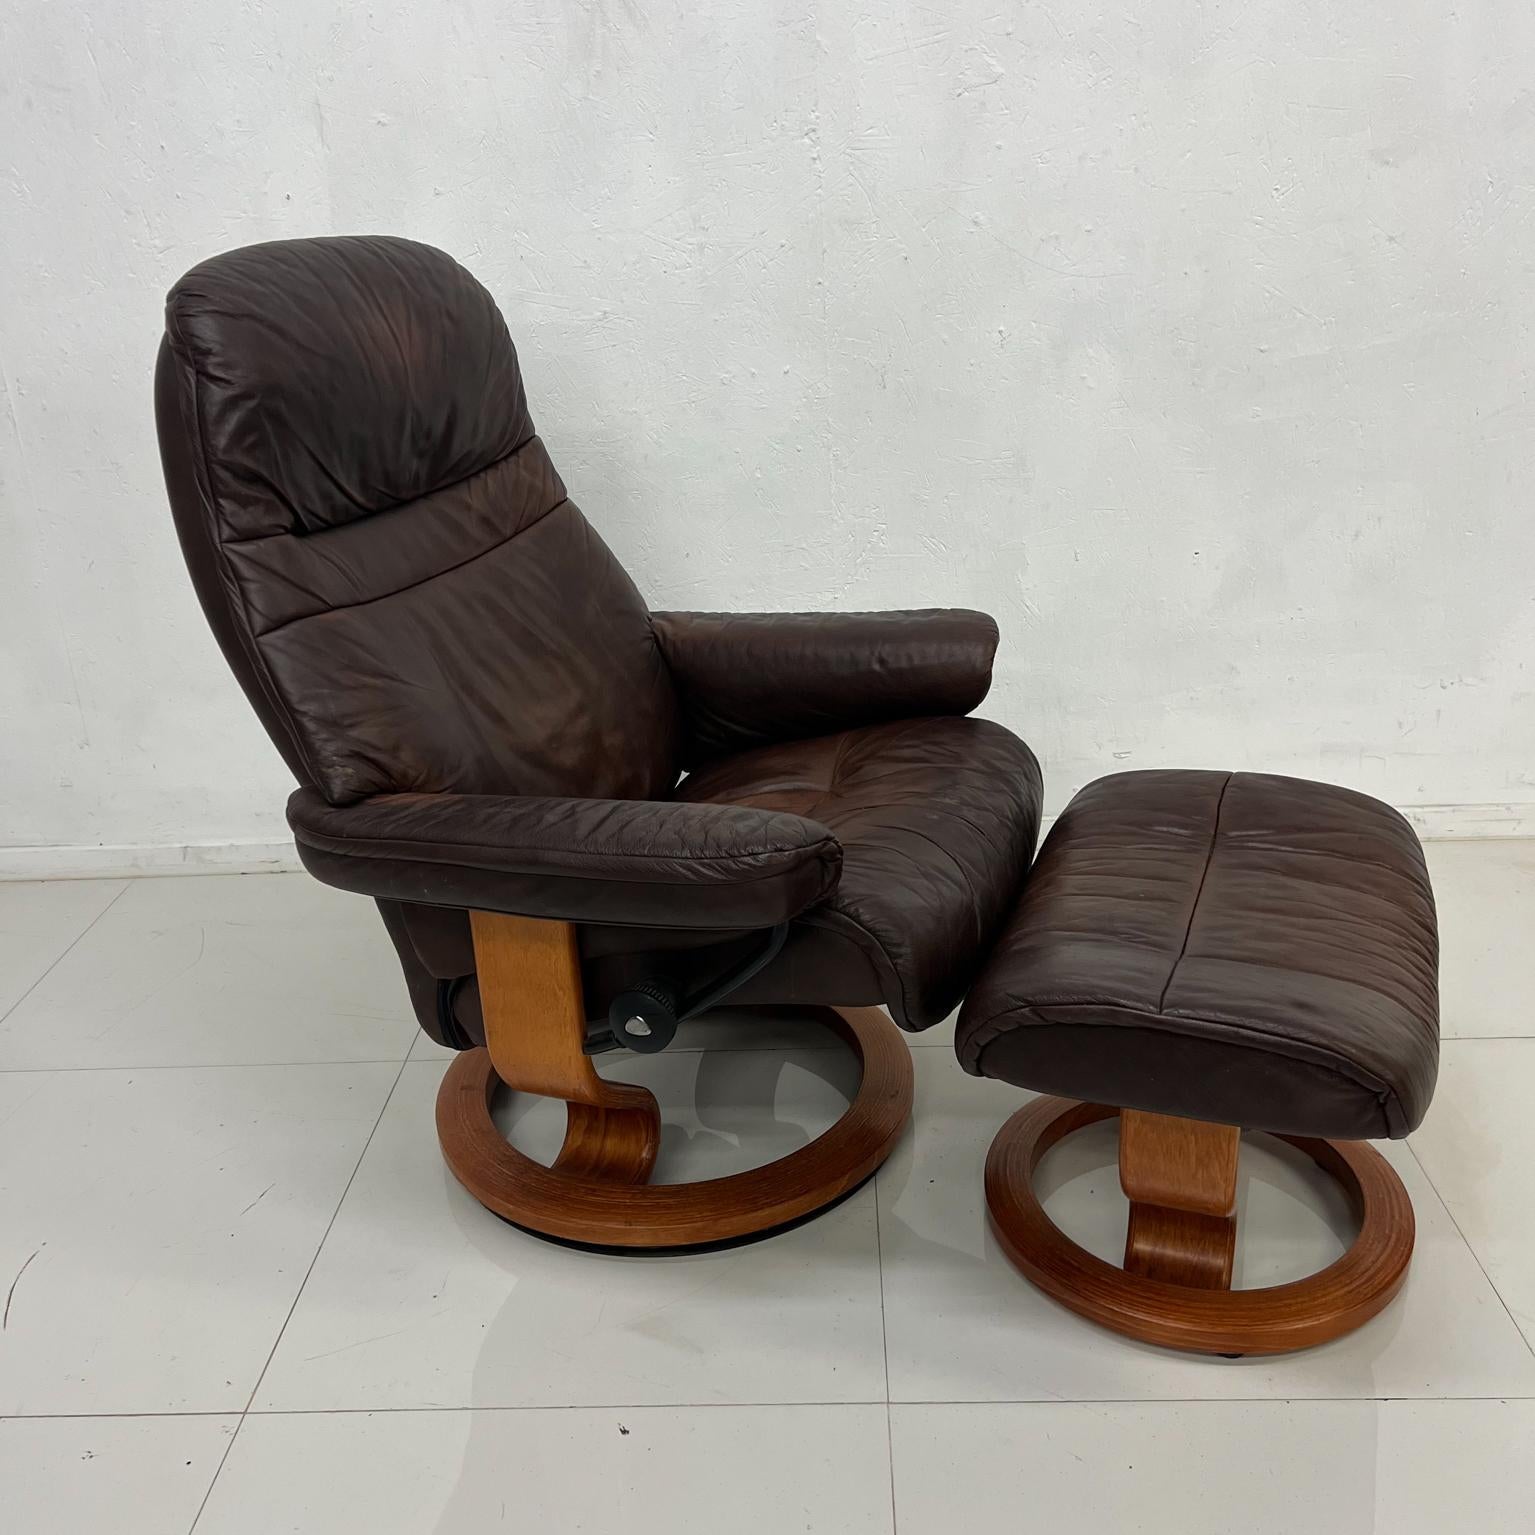 1990s Ekornes Stressless brown leather comfort recliner lounge & ottoman Norway
Stamped by maker
Ergonomic comfort and style.
Chair: 40.5 tall x 29.5 w x 28 d Seat: 16.5 h Arm: 21 h 
Ottoman: 22w x 16 d x 15.5 h 
Preowned unrestored vintage